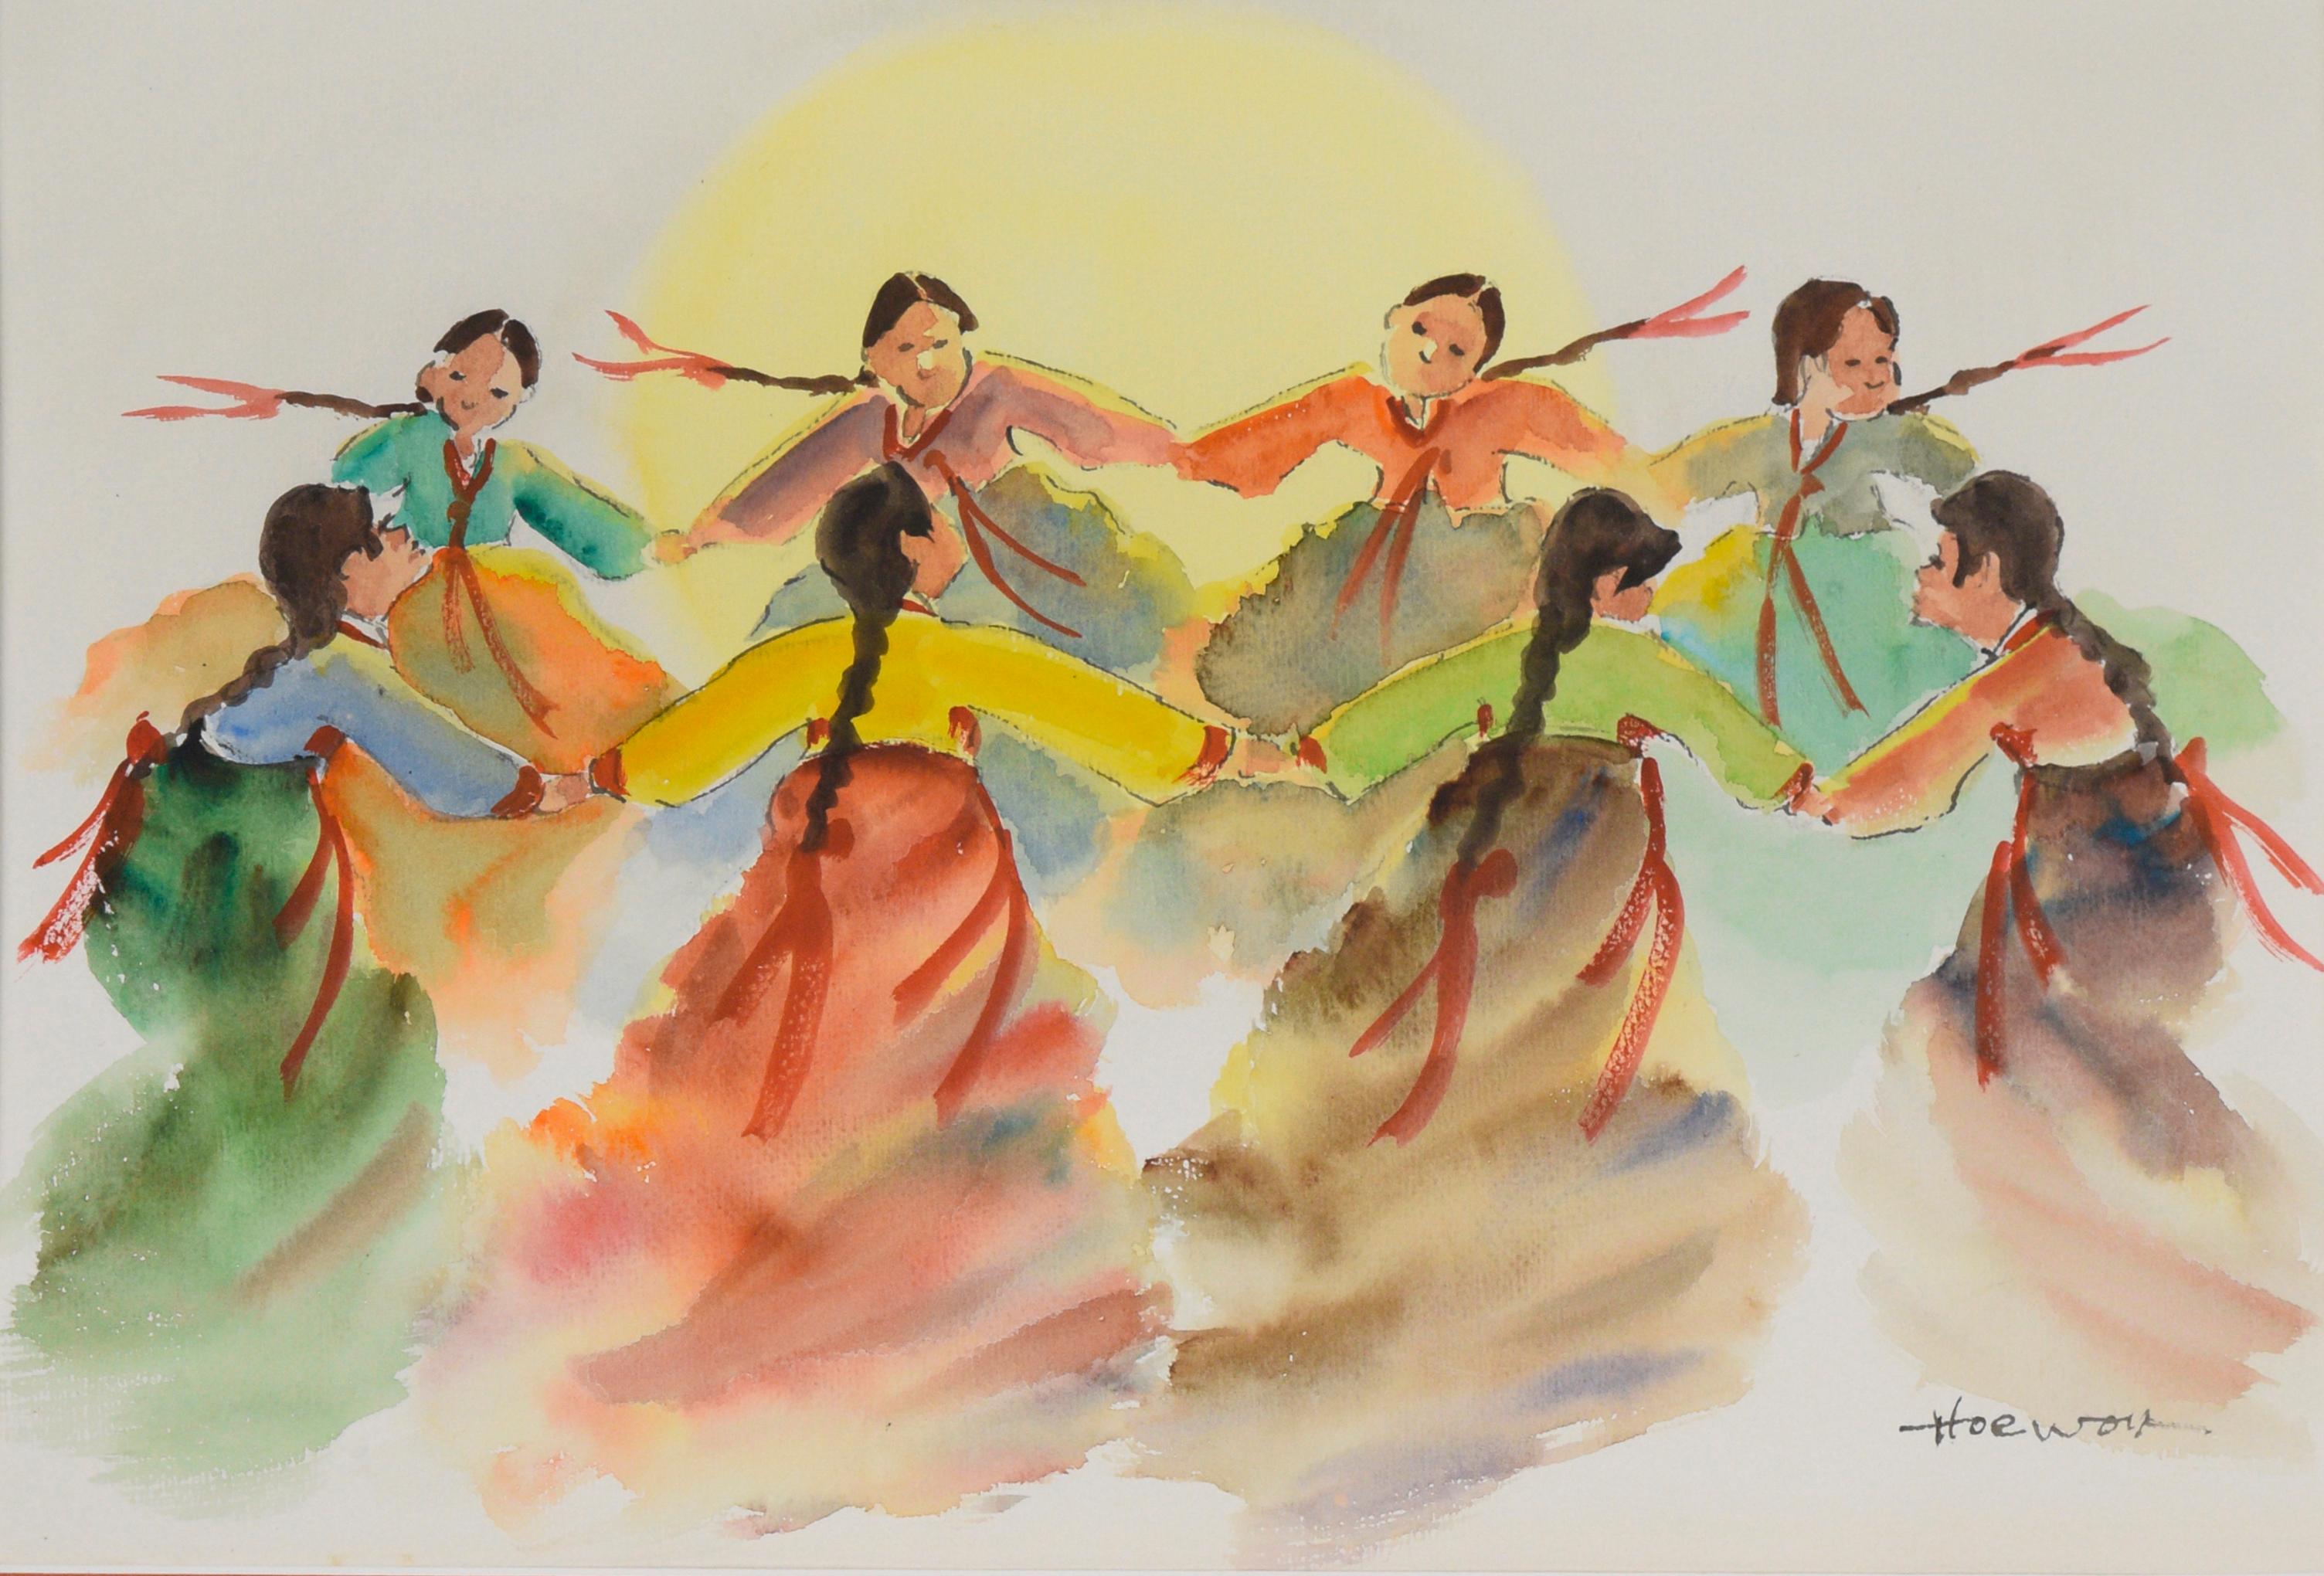 The Dance - Original Watercolor on Paper

Original watercolor painting depicting eight women holding hands while dancing in a circle in front of the sun by Hoe Won (Korean). Each woman is wearing a long bright skirt, a long sleeve top, with braided